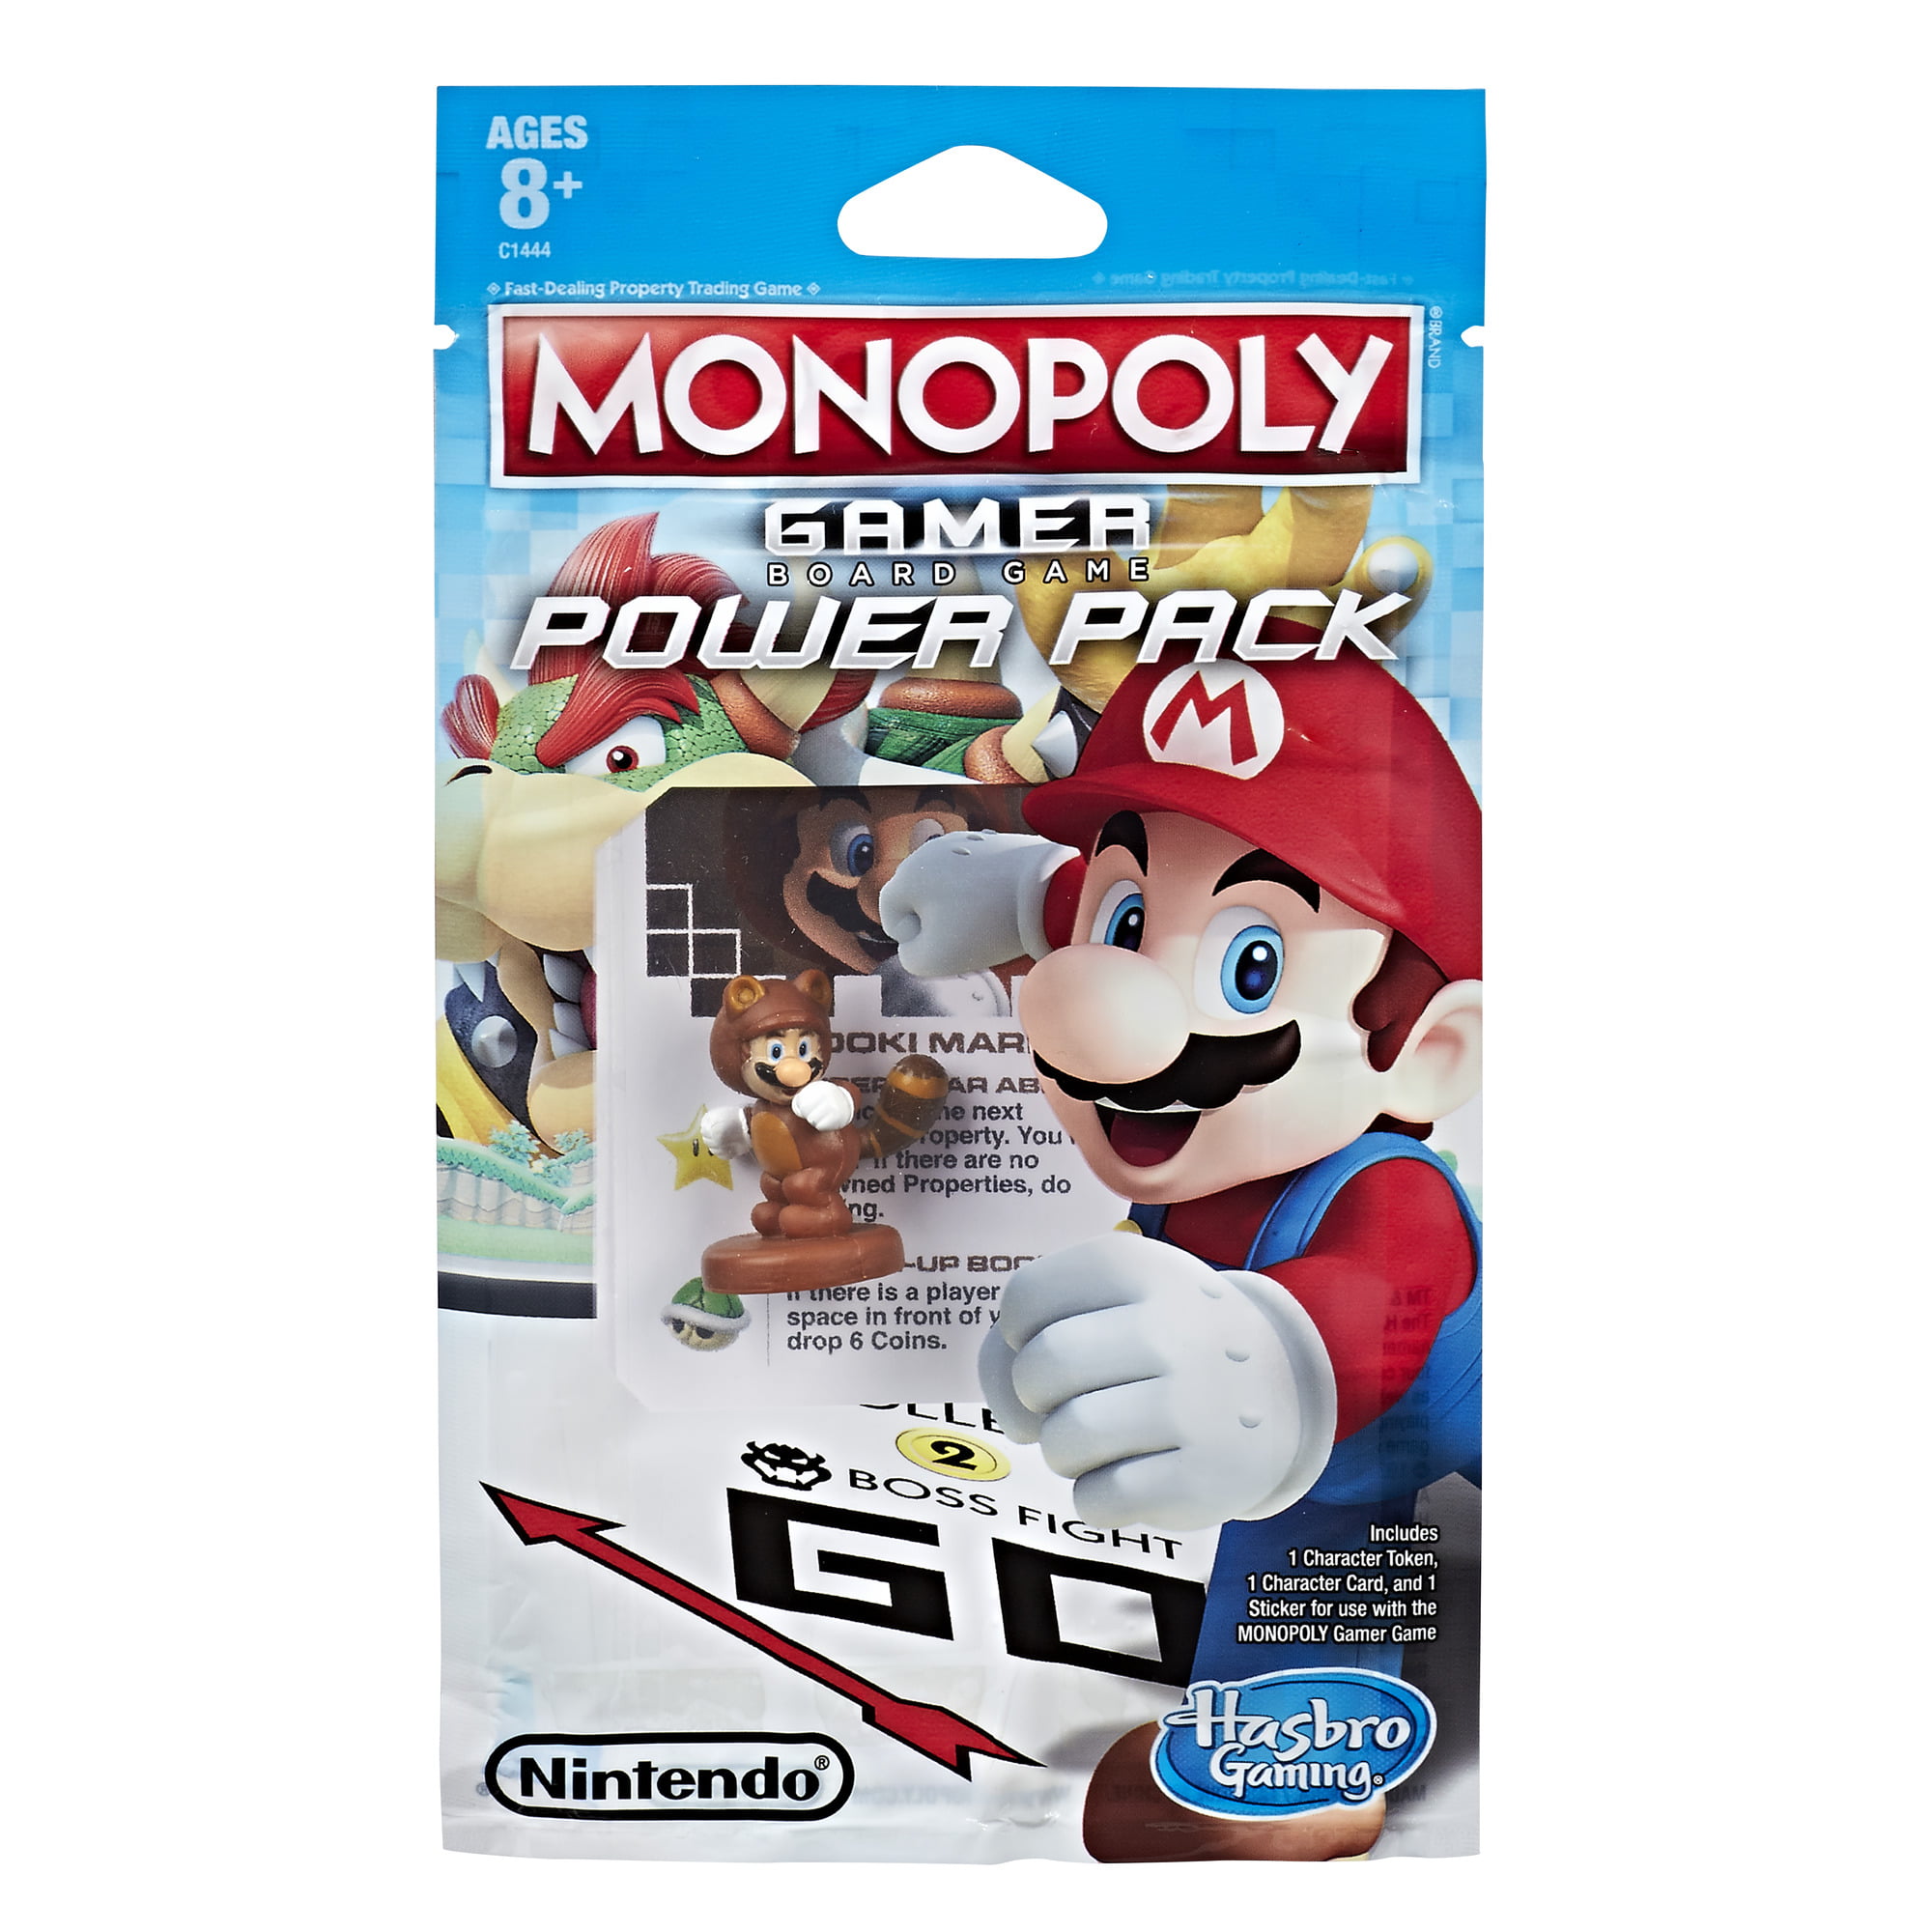 Monopoly Gamer Power Pack Mario Kart Game Piece Token Board Game Pick a Piece 